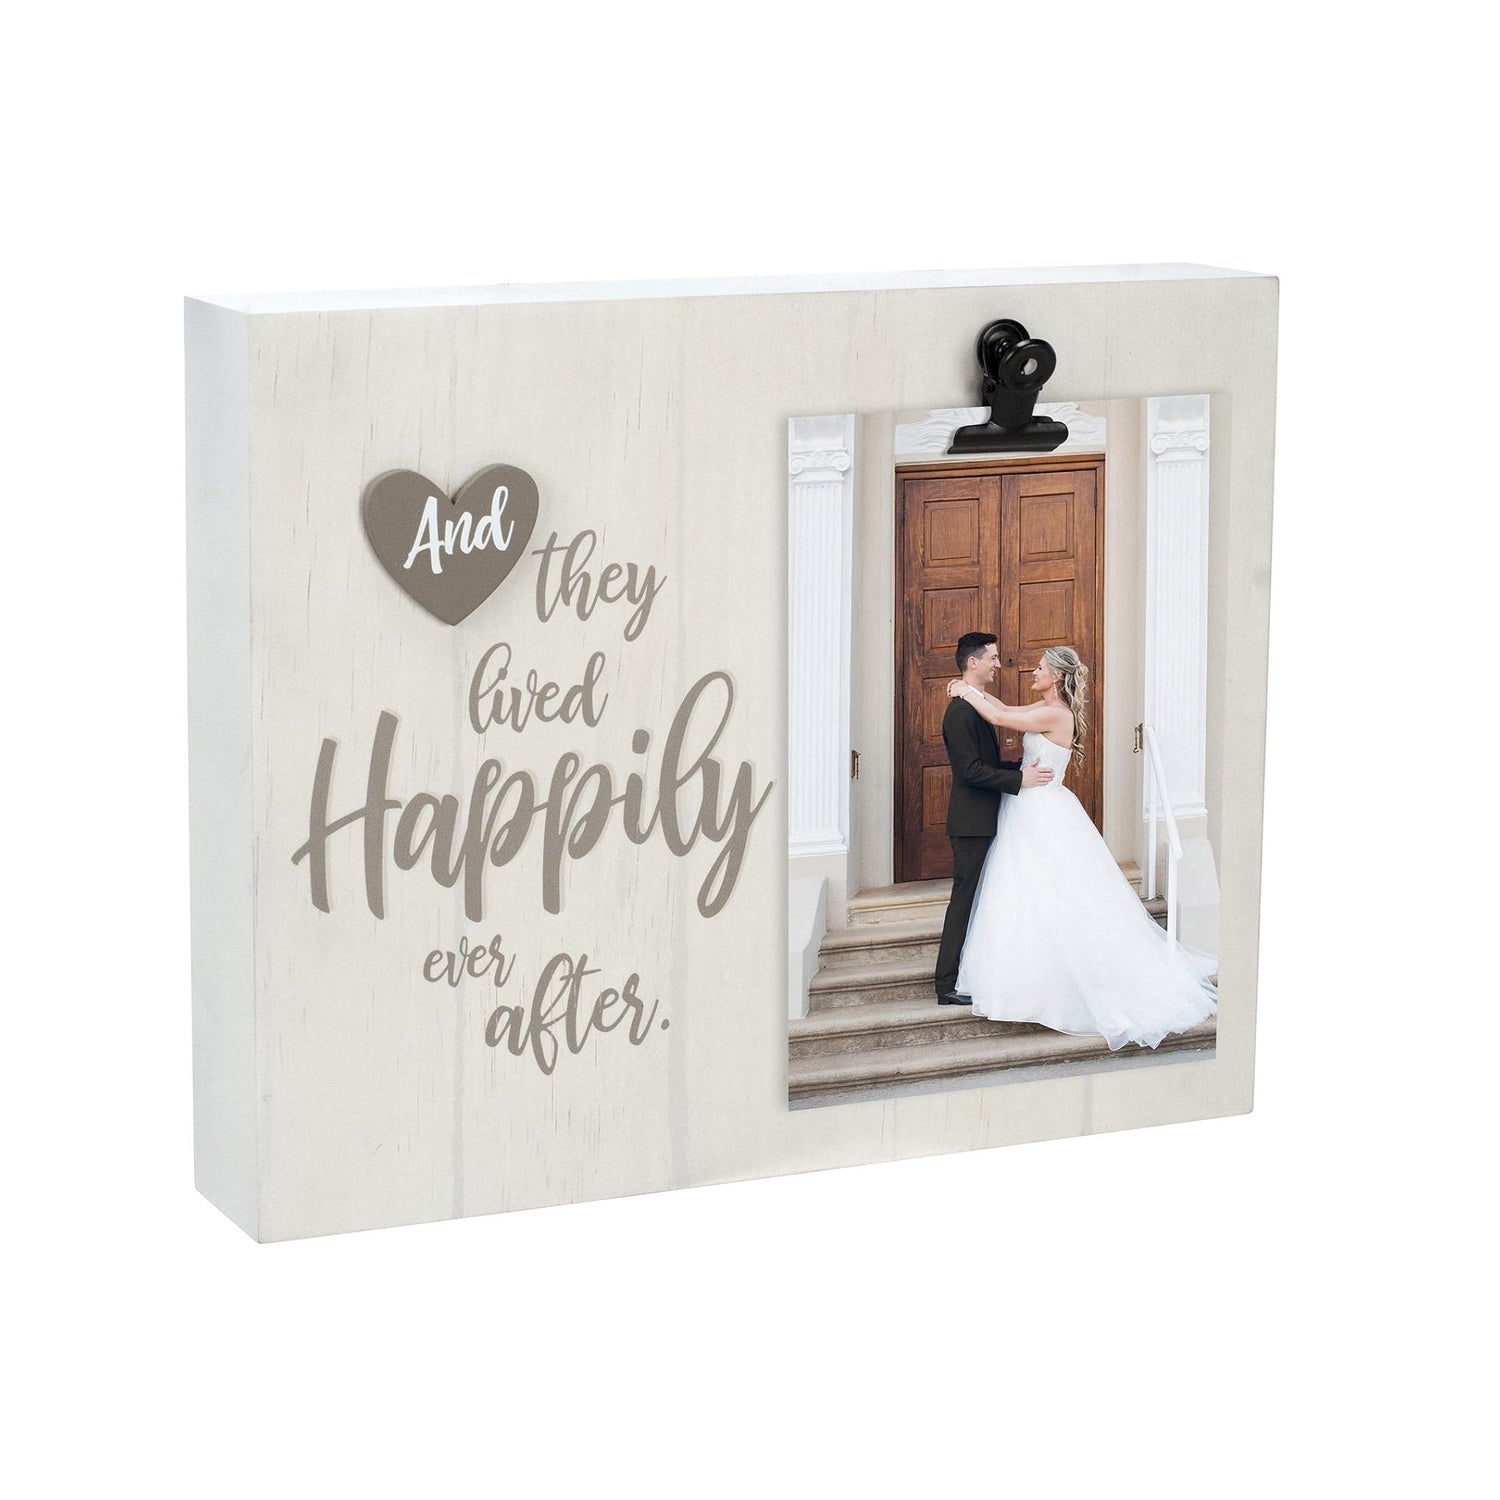 Malden And They lived Happily Ever After Clip Photo Frame